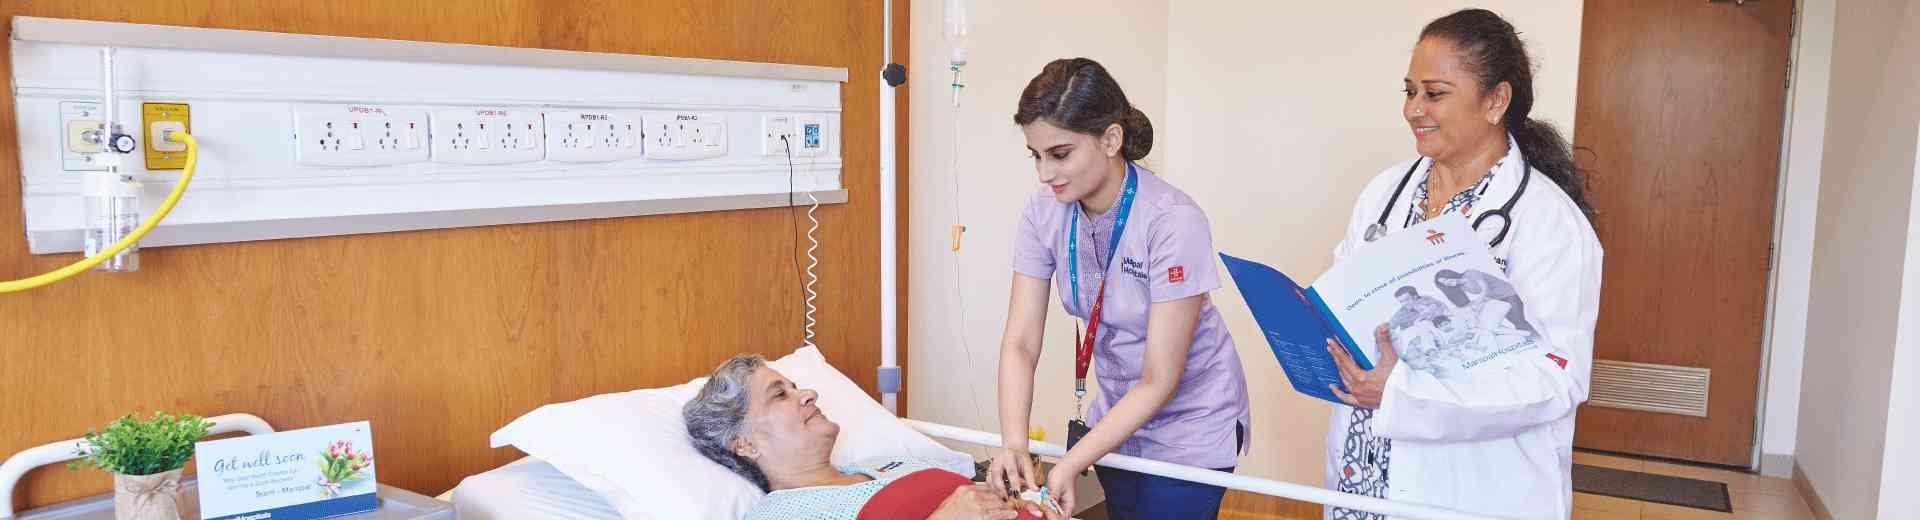 Outpatient Inpatient and Emergency services in Vijayawada